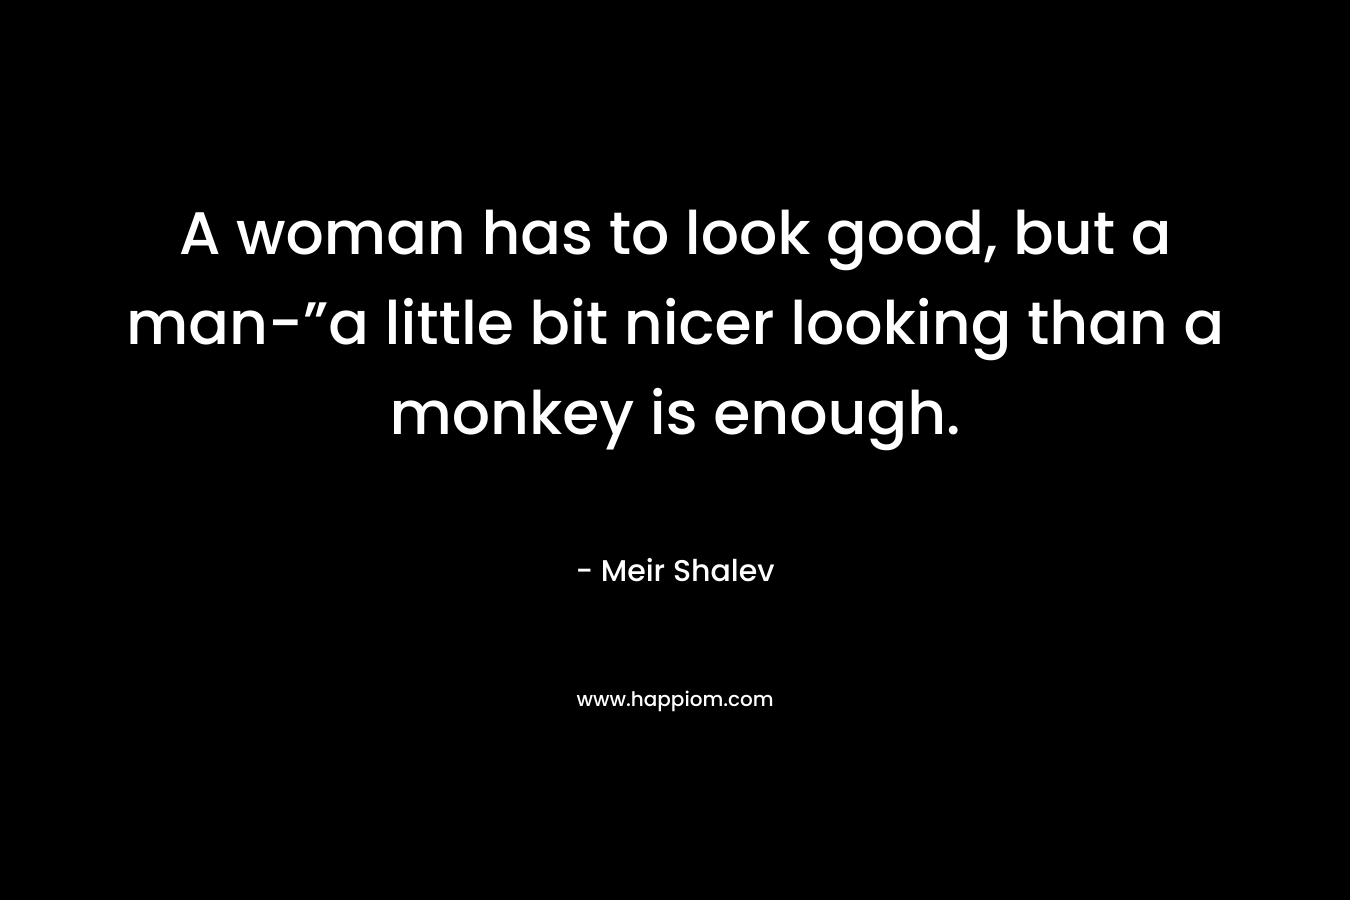 A woman has to look good, but a man-”a little bit nicer looking than a monkey is enough.